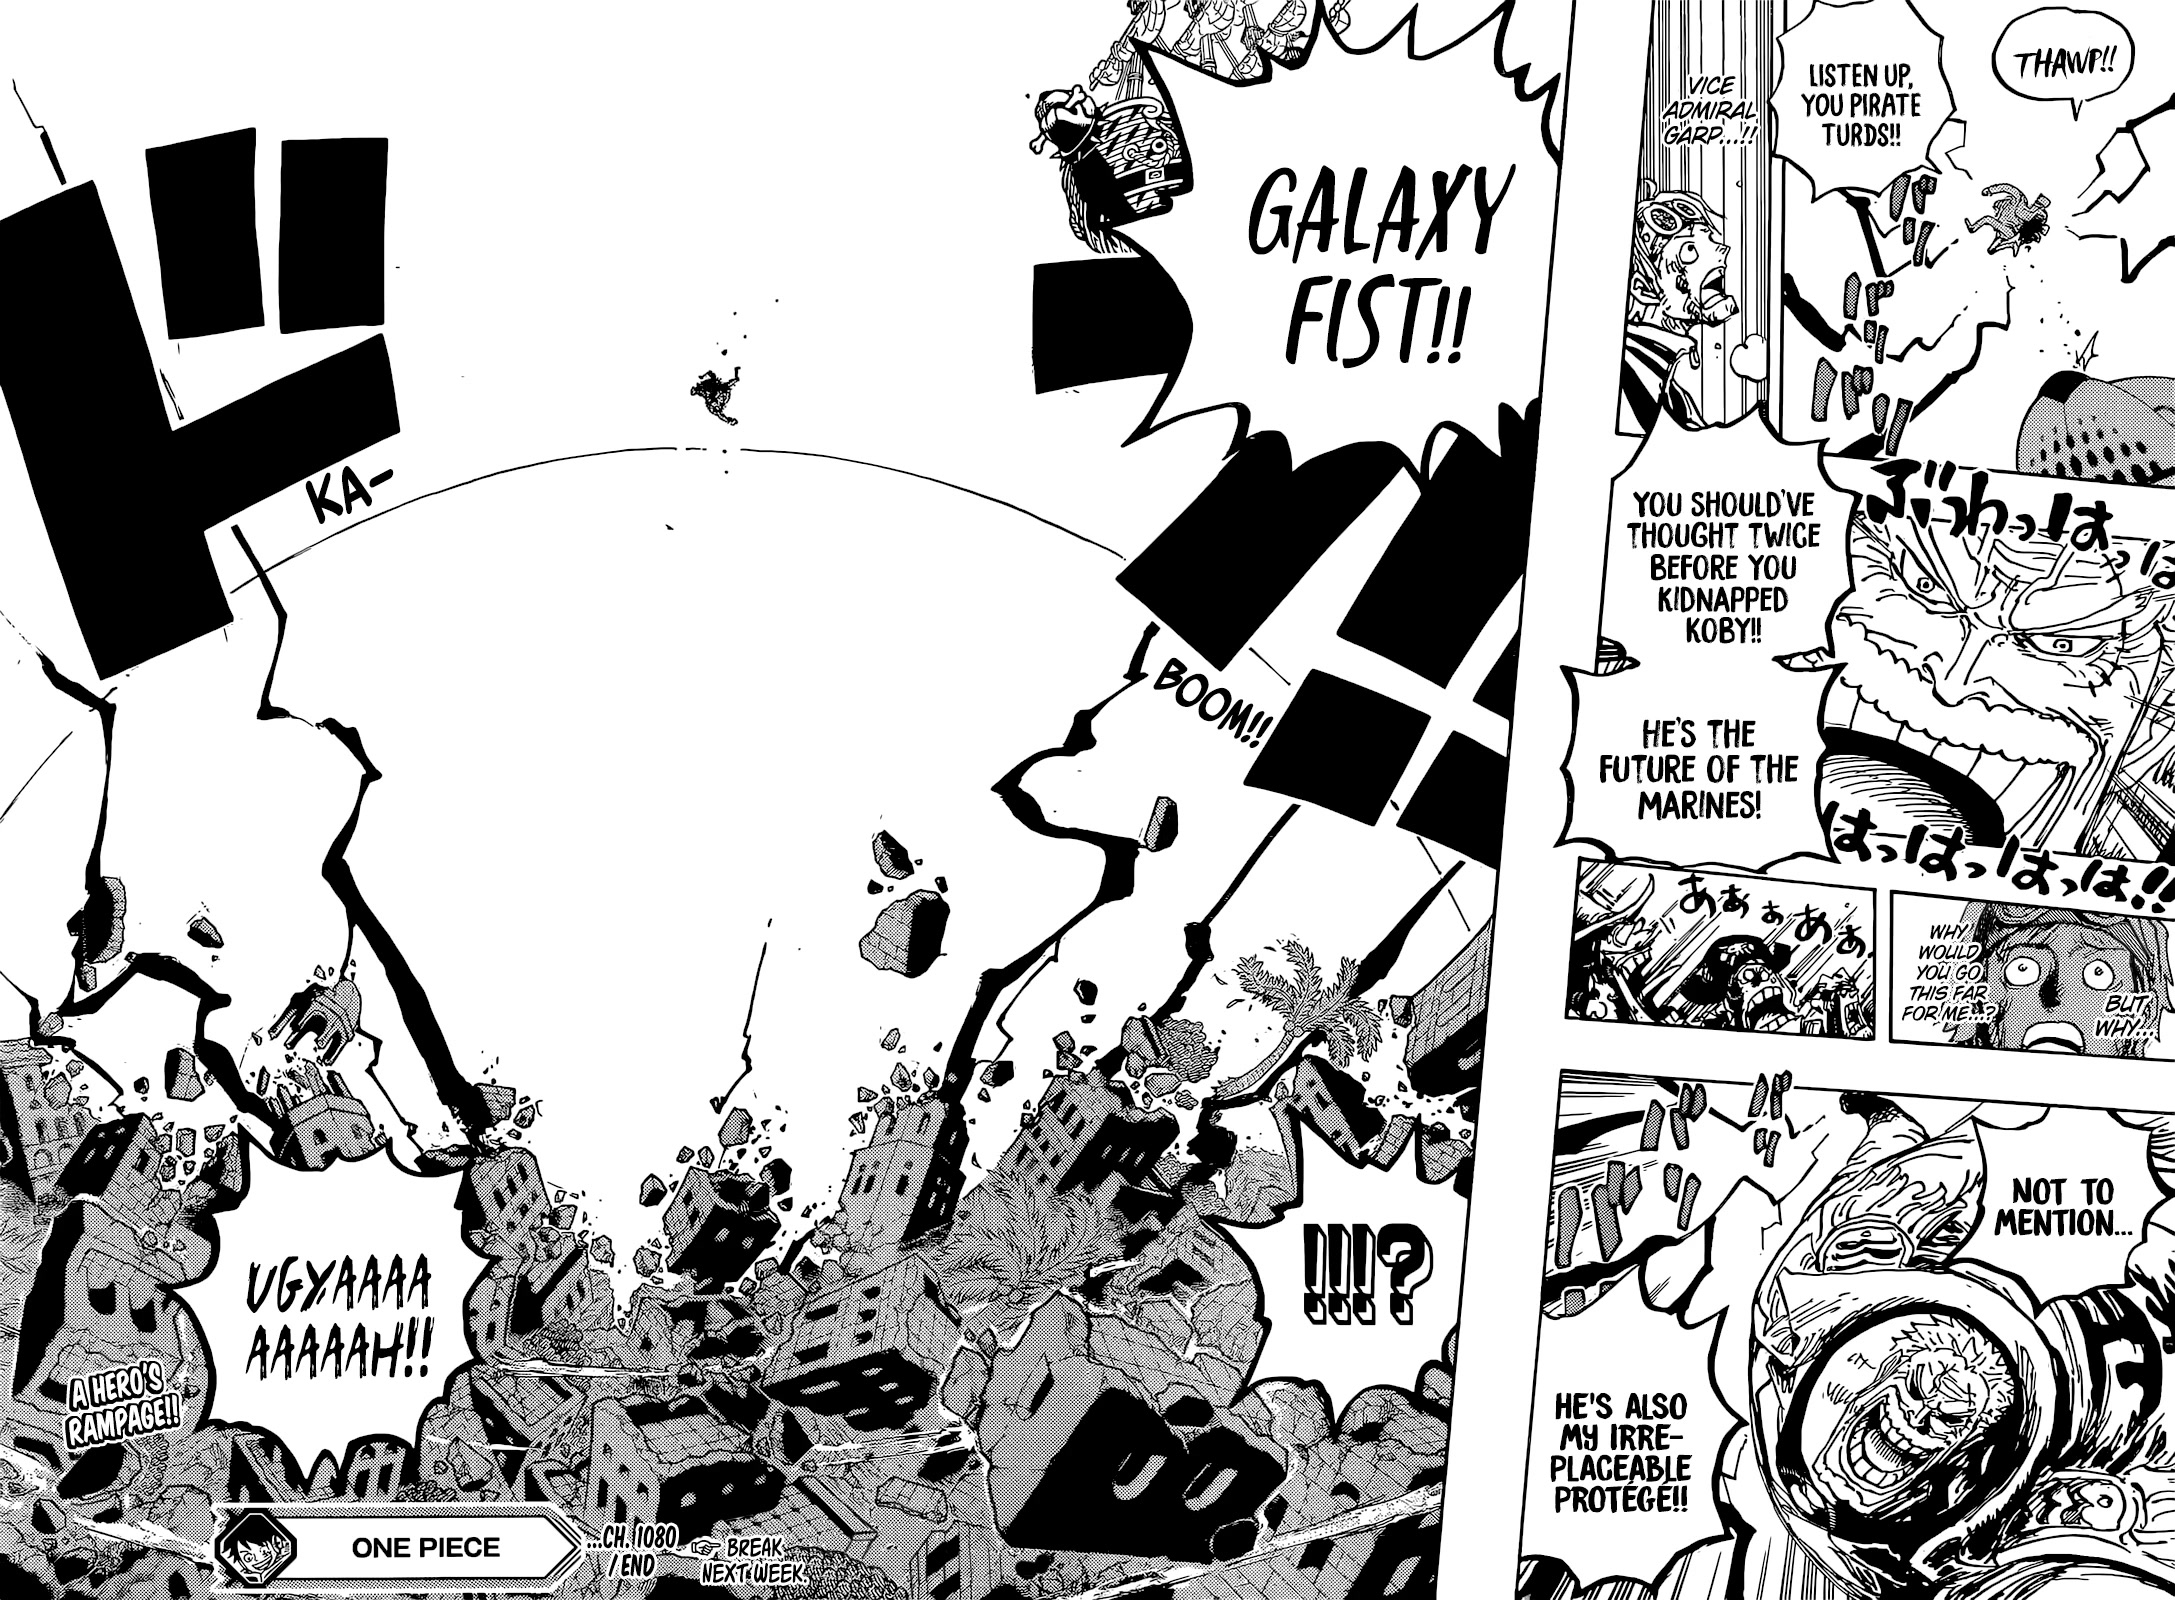 One piece, Chapter 1080 The Legendary Hero image 16